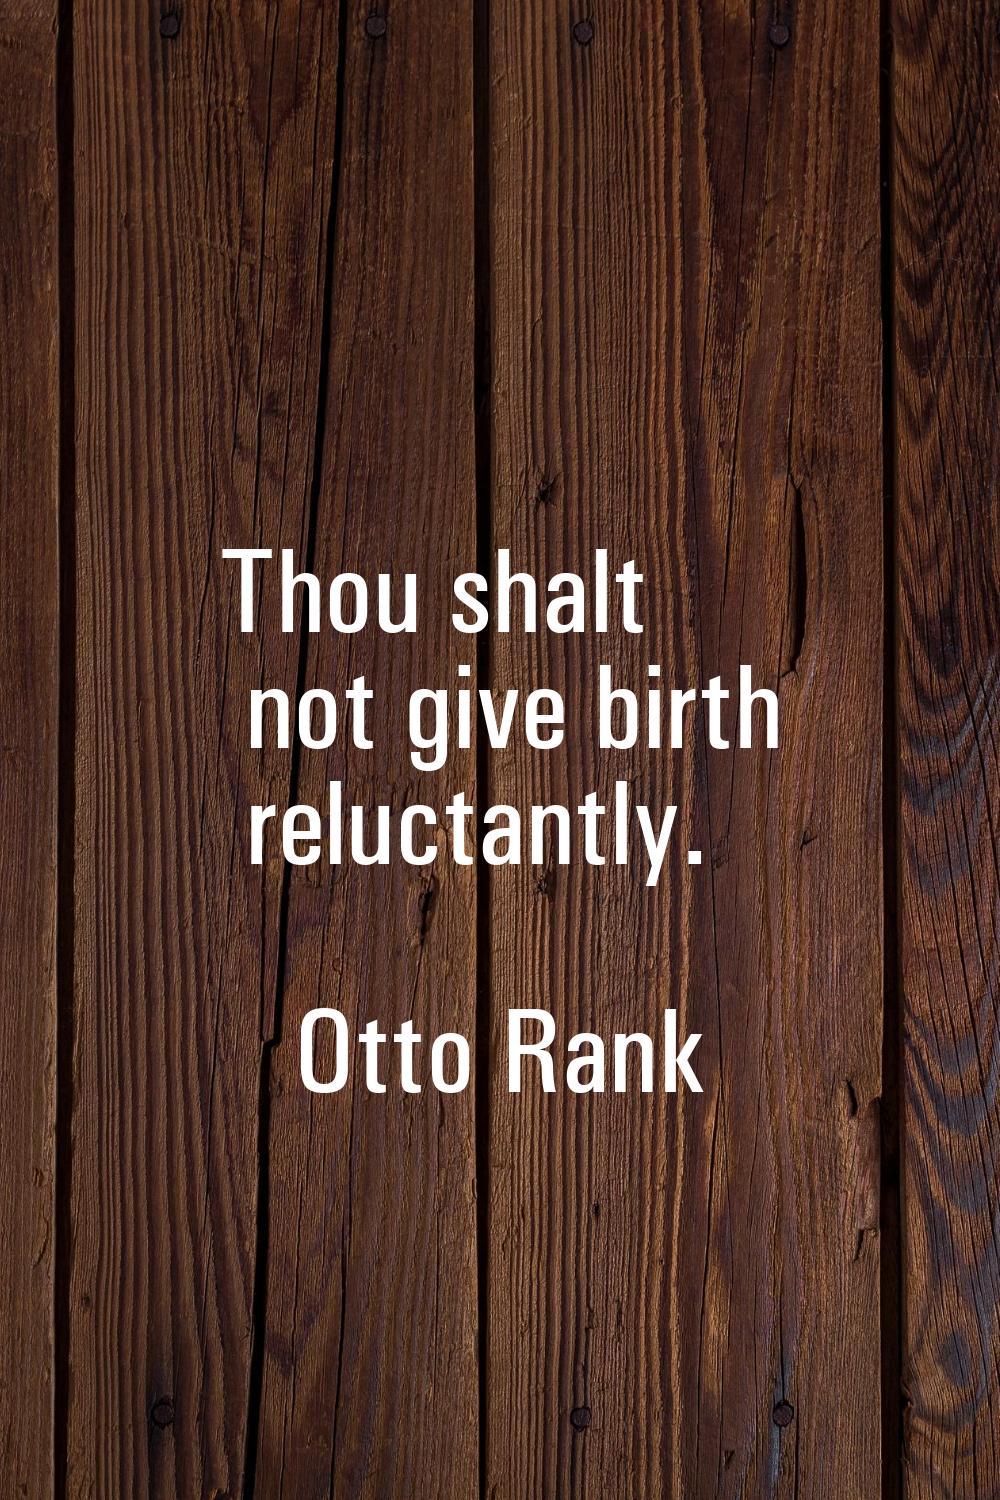 Thou shalt not give birth reluctantly.